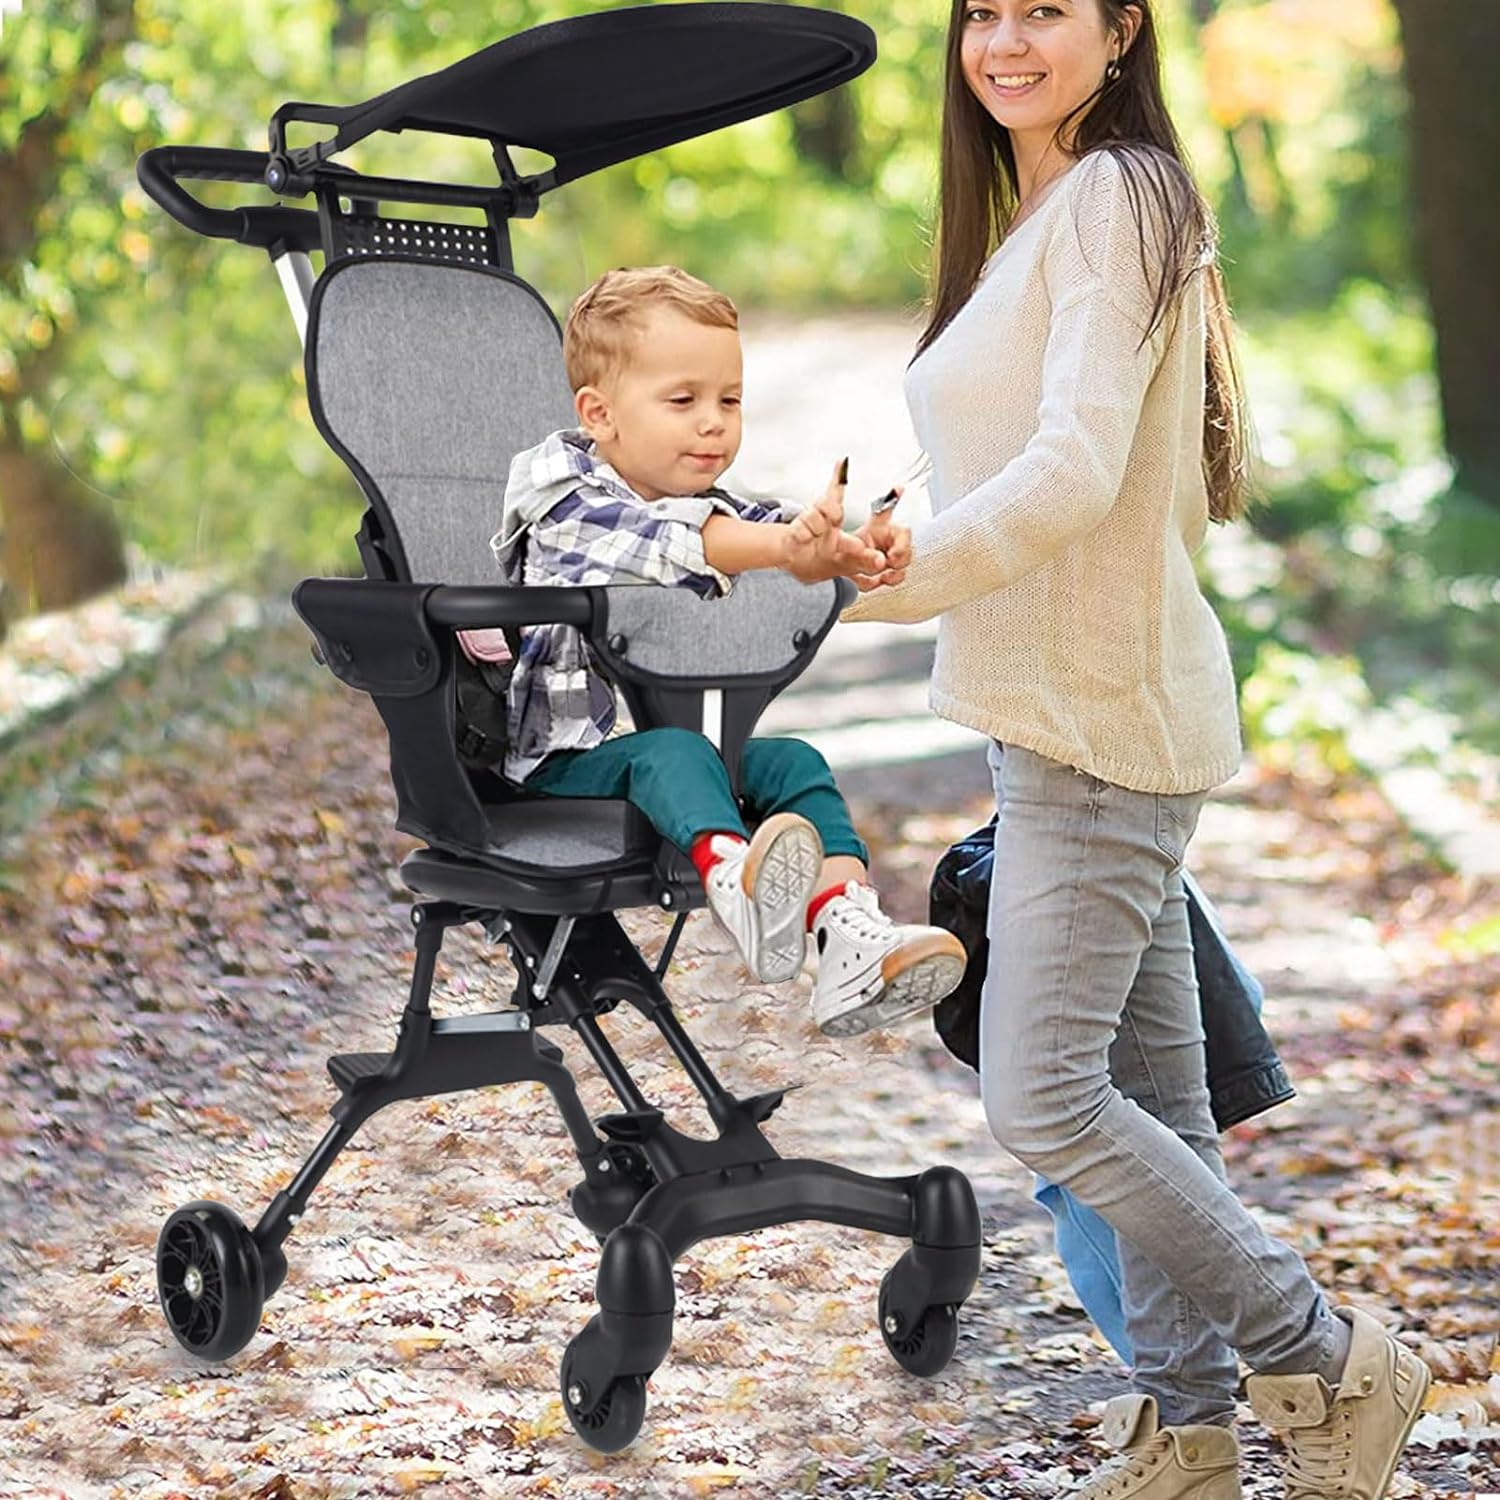 Lightweight Stroller, Convenience Baby Stroller with 360° Two-Way Rotational Seat, Baby Toddler Stroller for Travel, Multi Position Recline, Ultra Compact Fold & Airplane Ready Travel Stroller